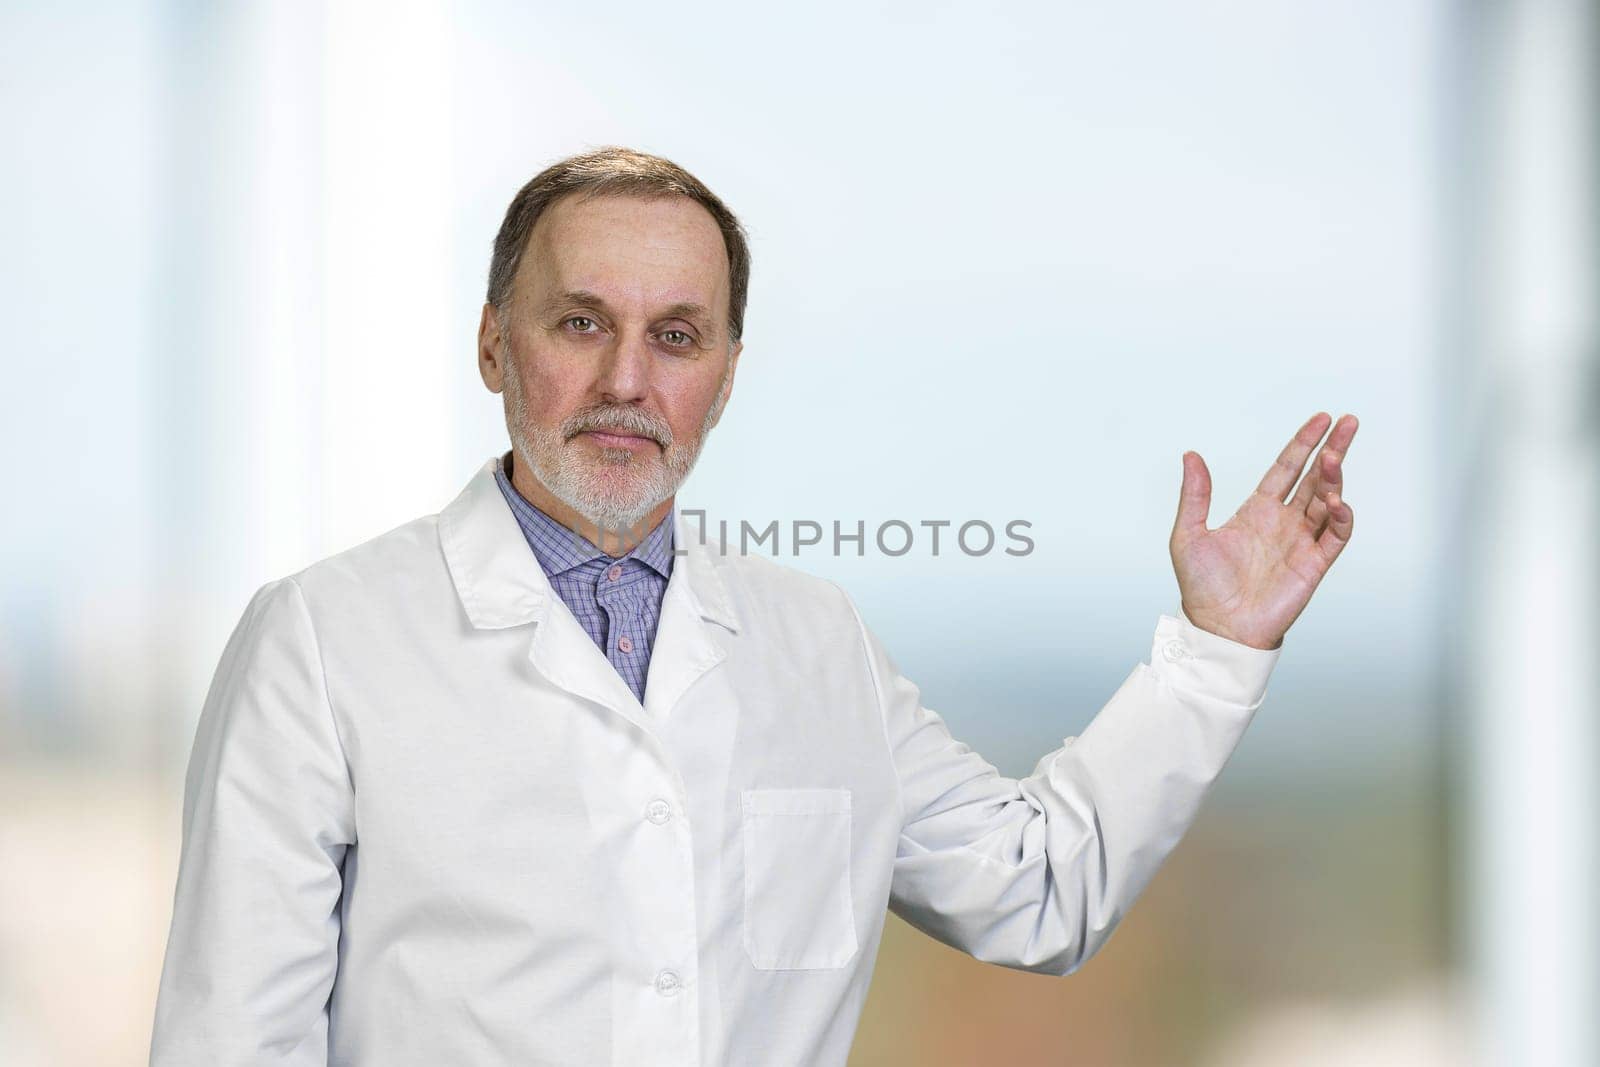 Portrait of senior doctor pointing up showing on copy space. Indoor blurred background.